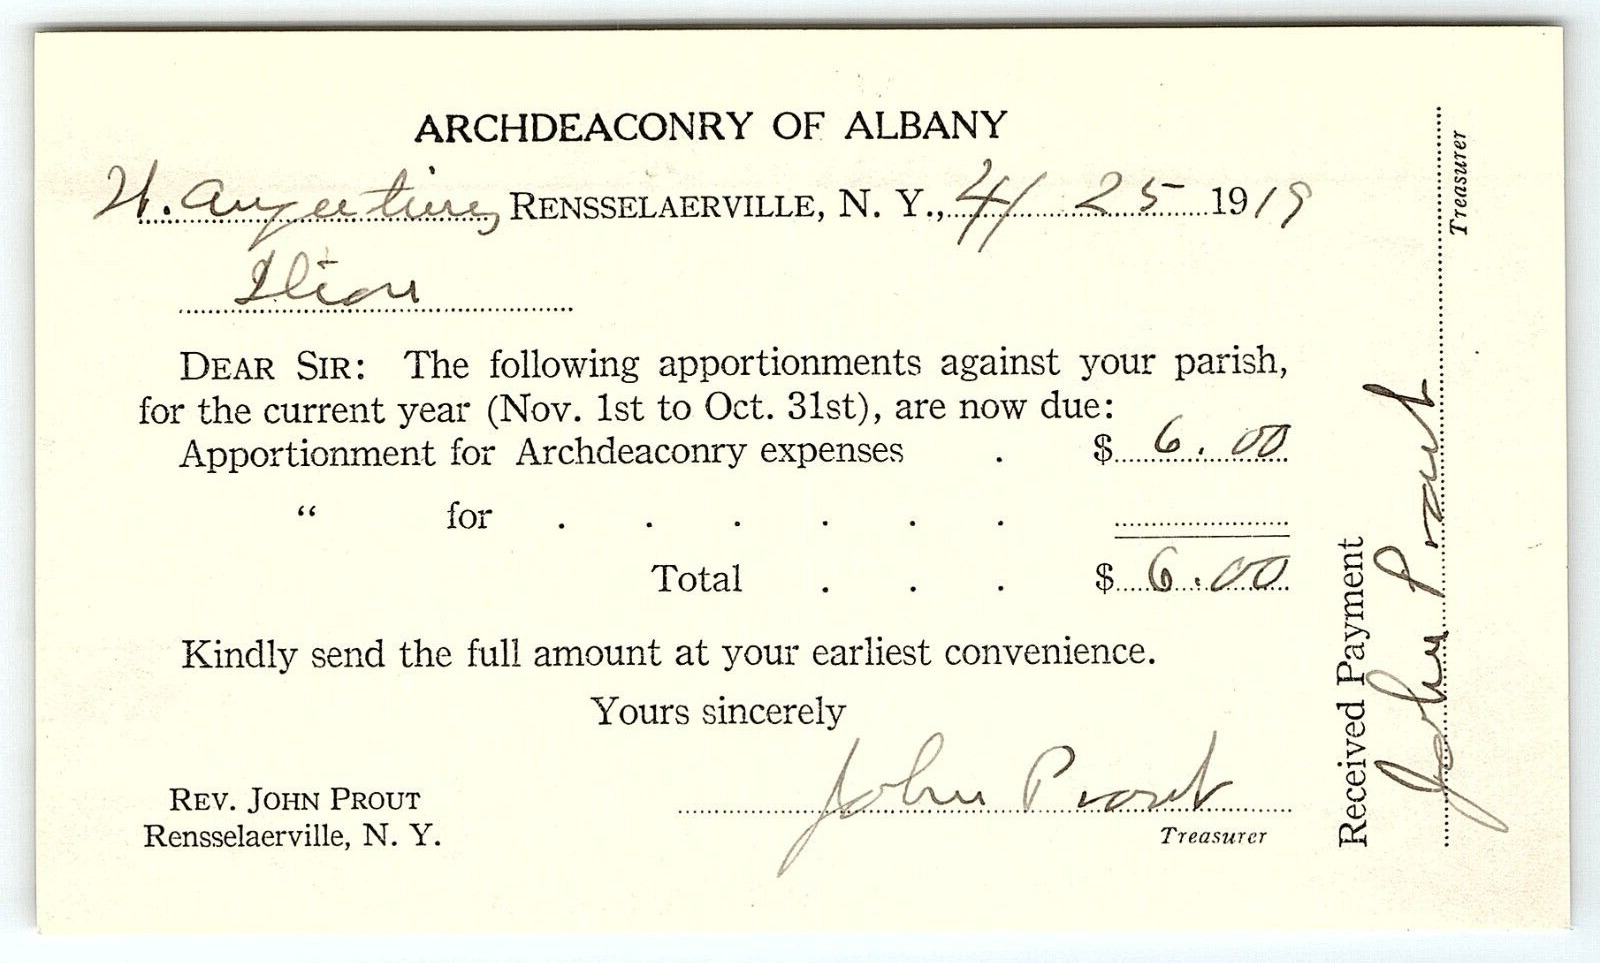 1919 RENSSELAERVILLE NEW YORK ARCHDEACONRY OF ALBANY APPORTIONMENT INVOICE Z4585